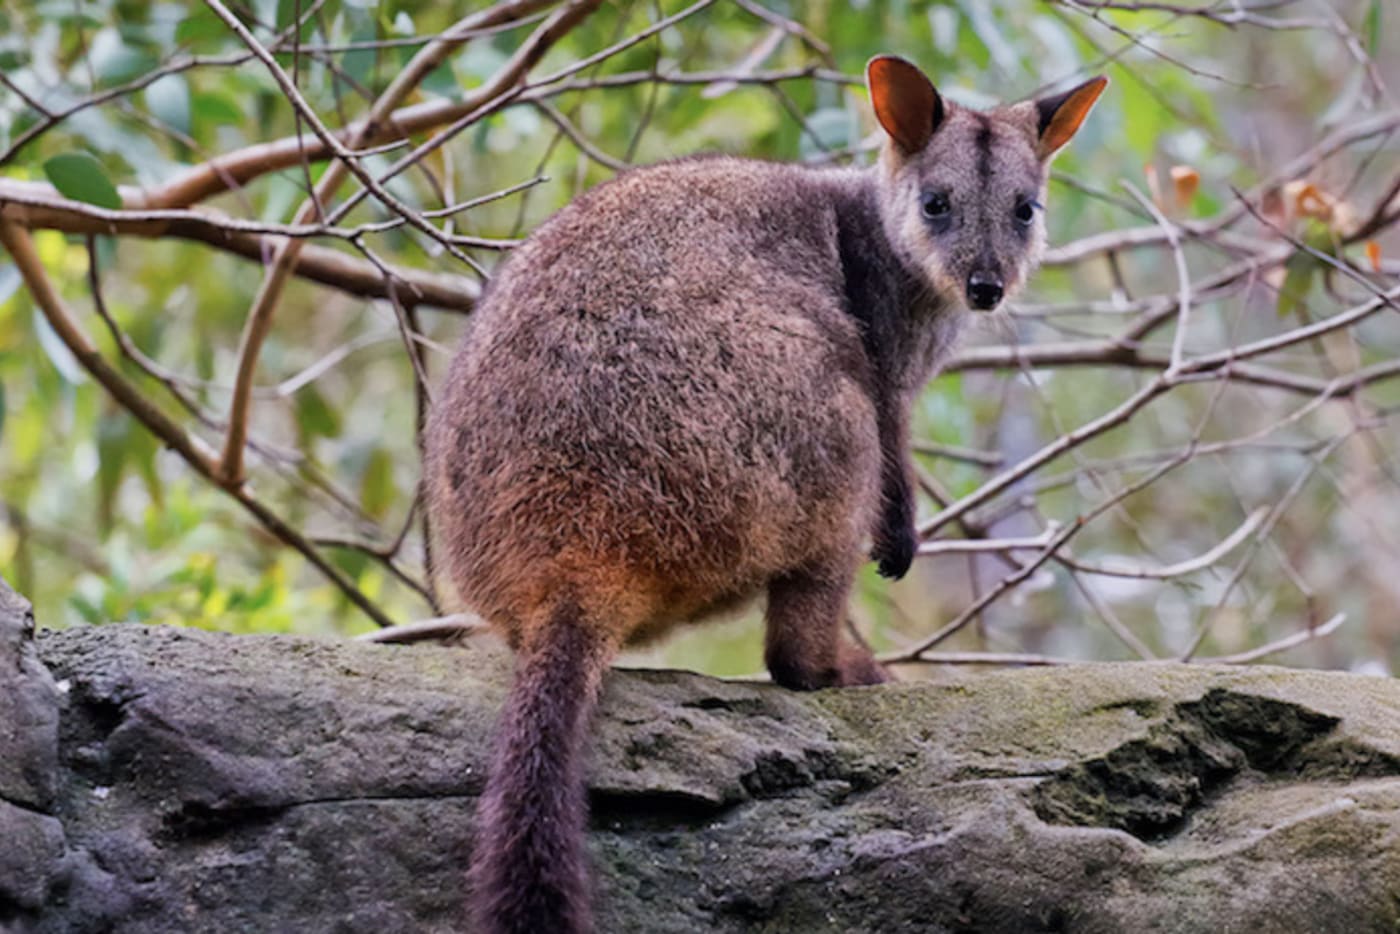 Brush-tailed rock wallaby looks over its shoulder